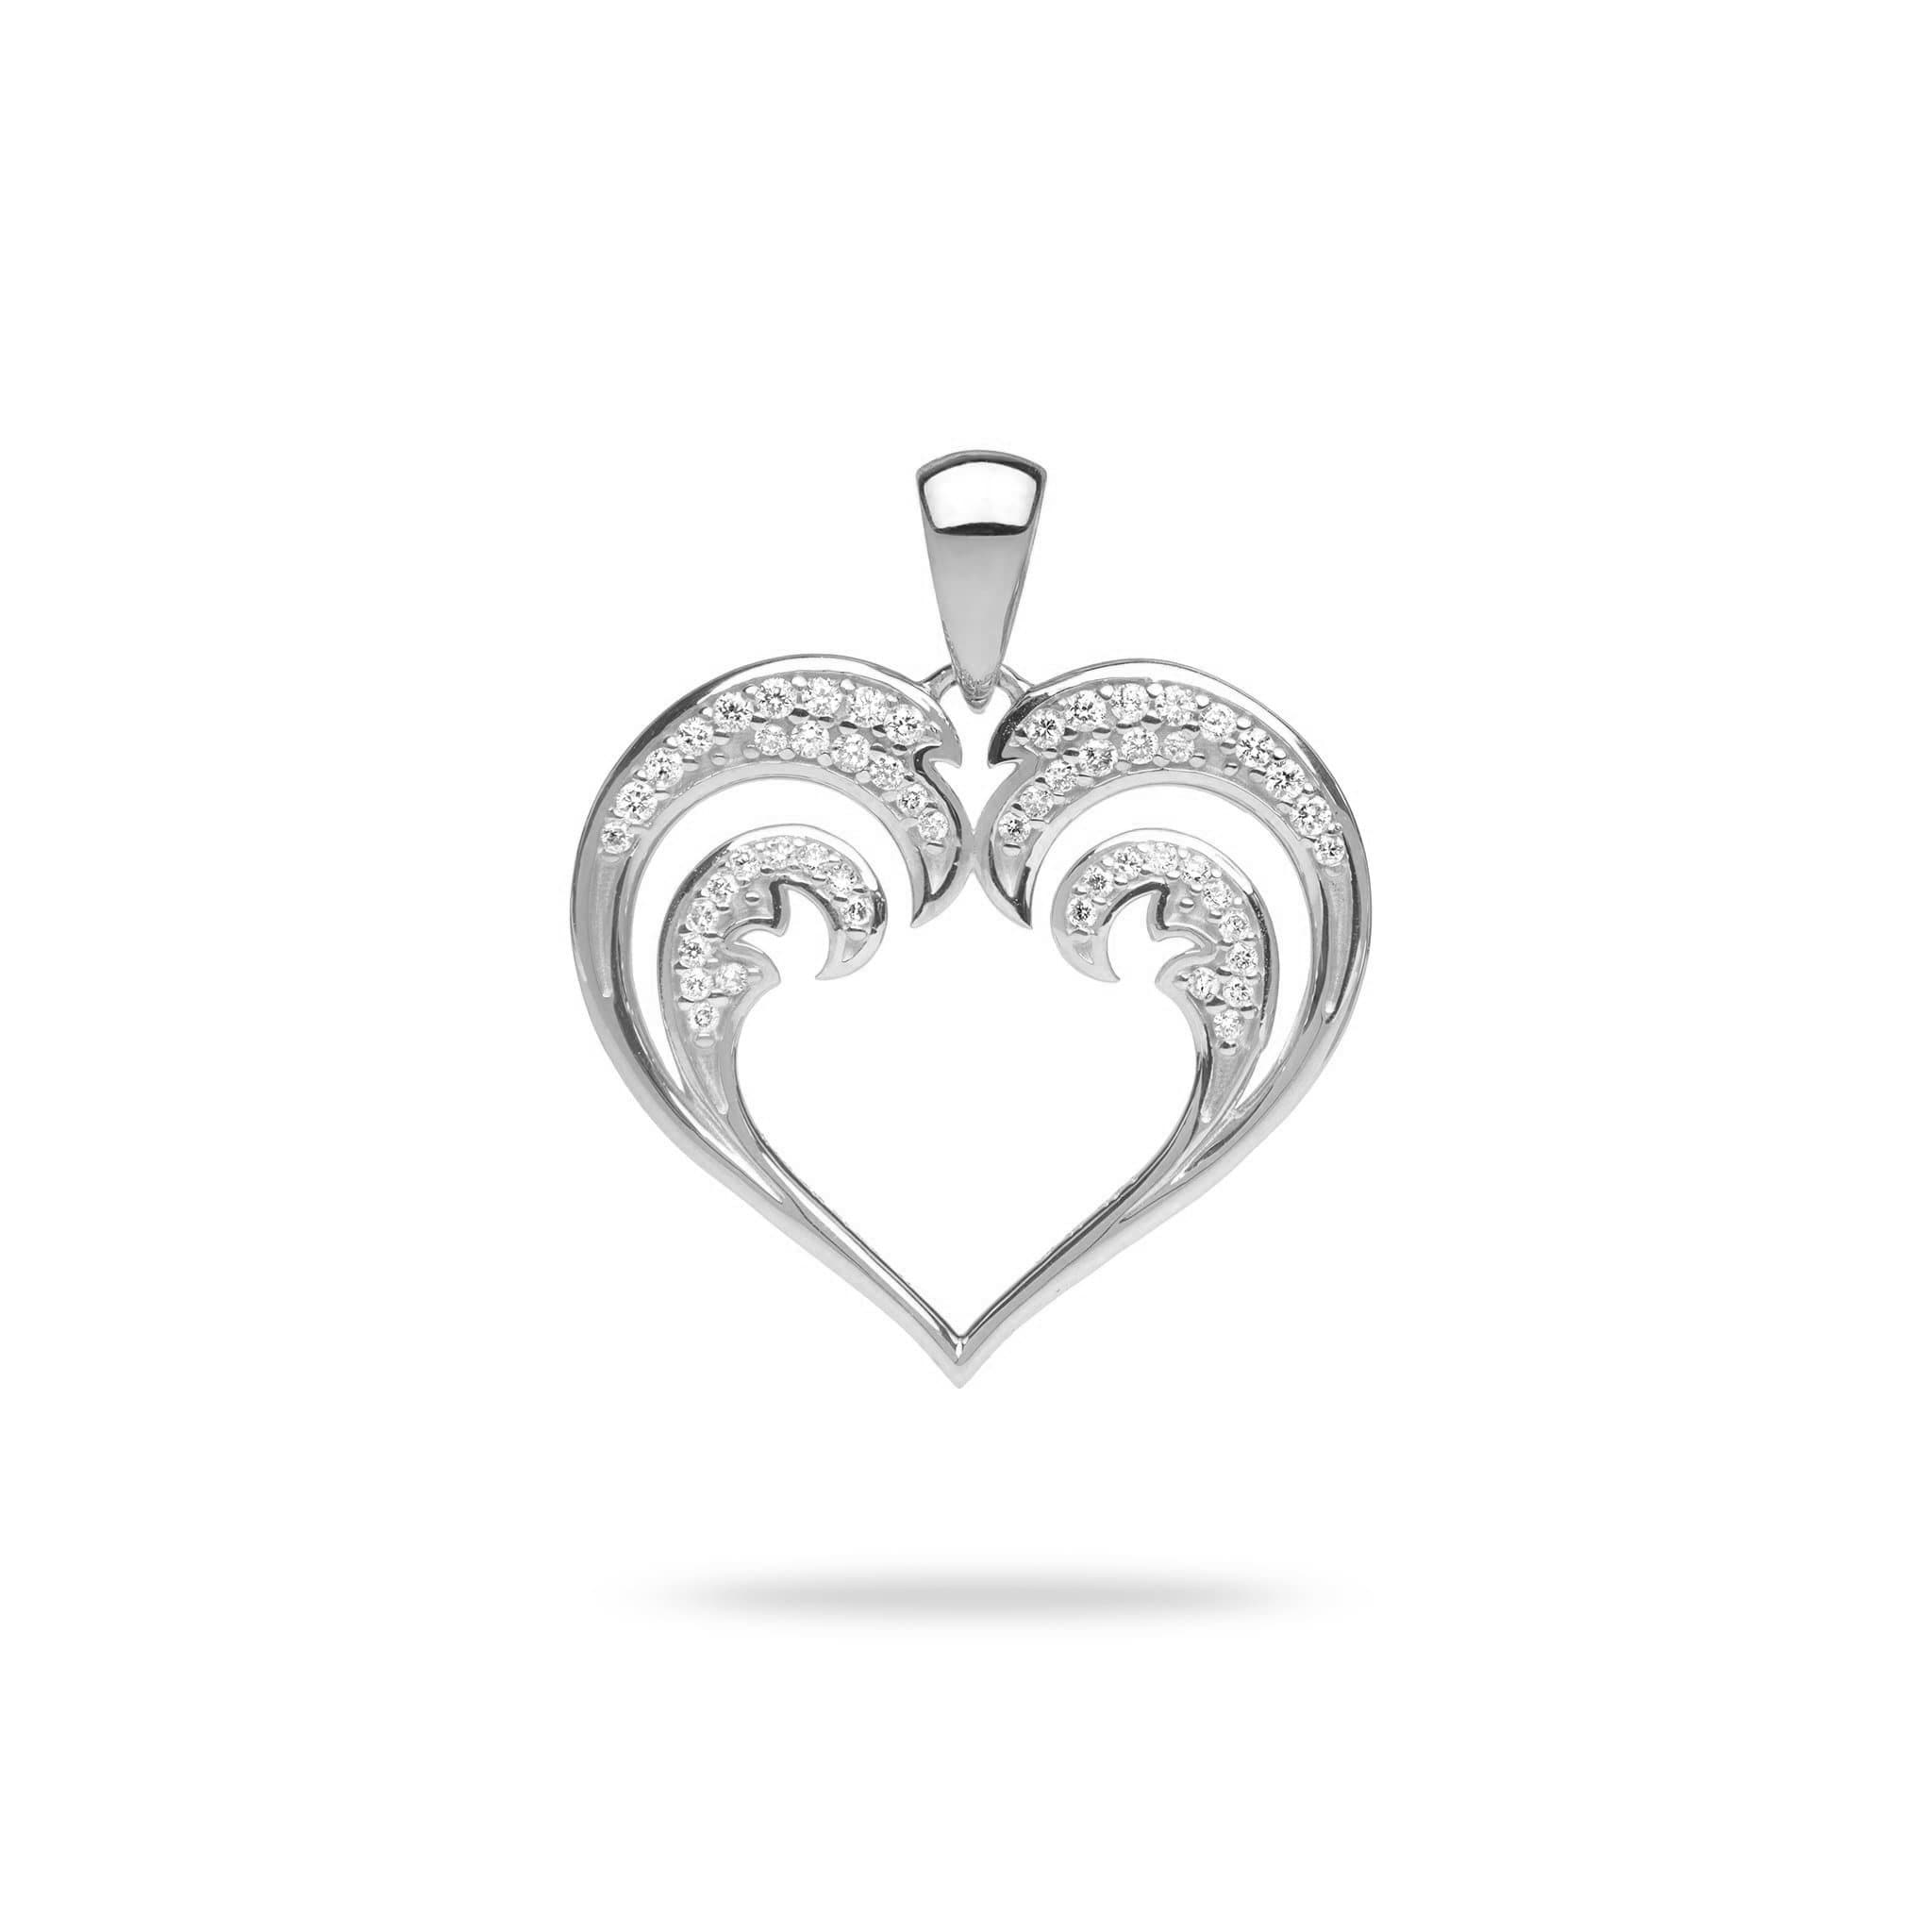 Nalu Heart Pendant in White Gold with Diamonds - 20mm - Maui Divers Jewelry